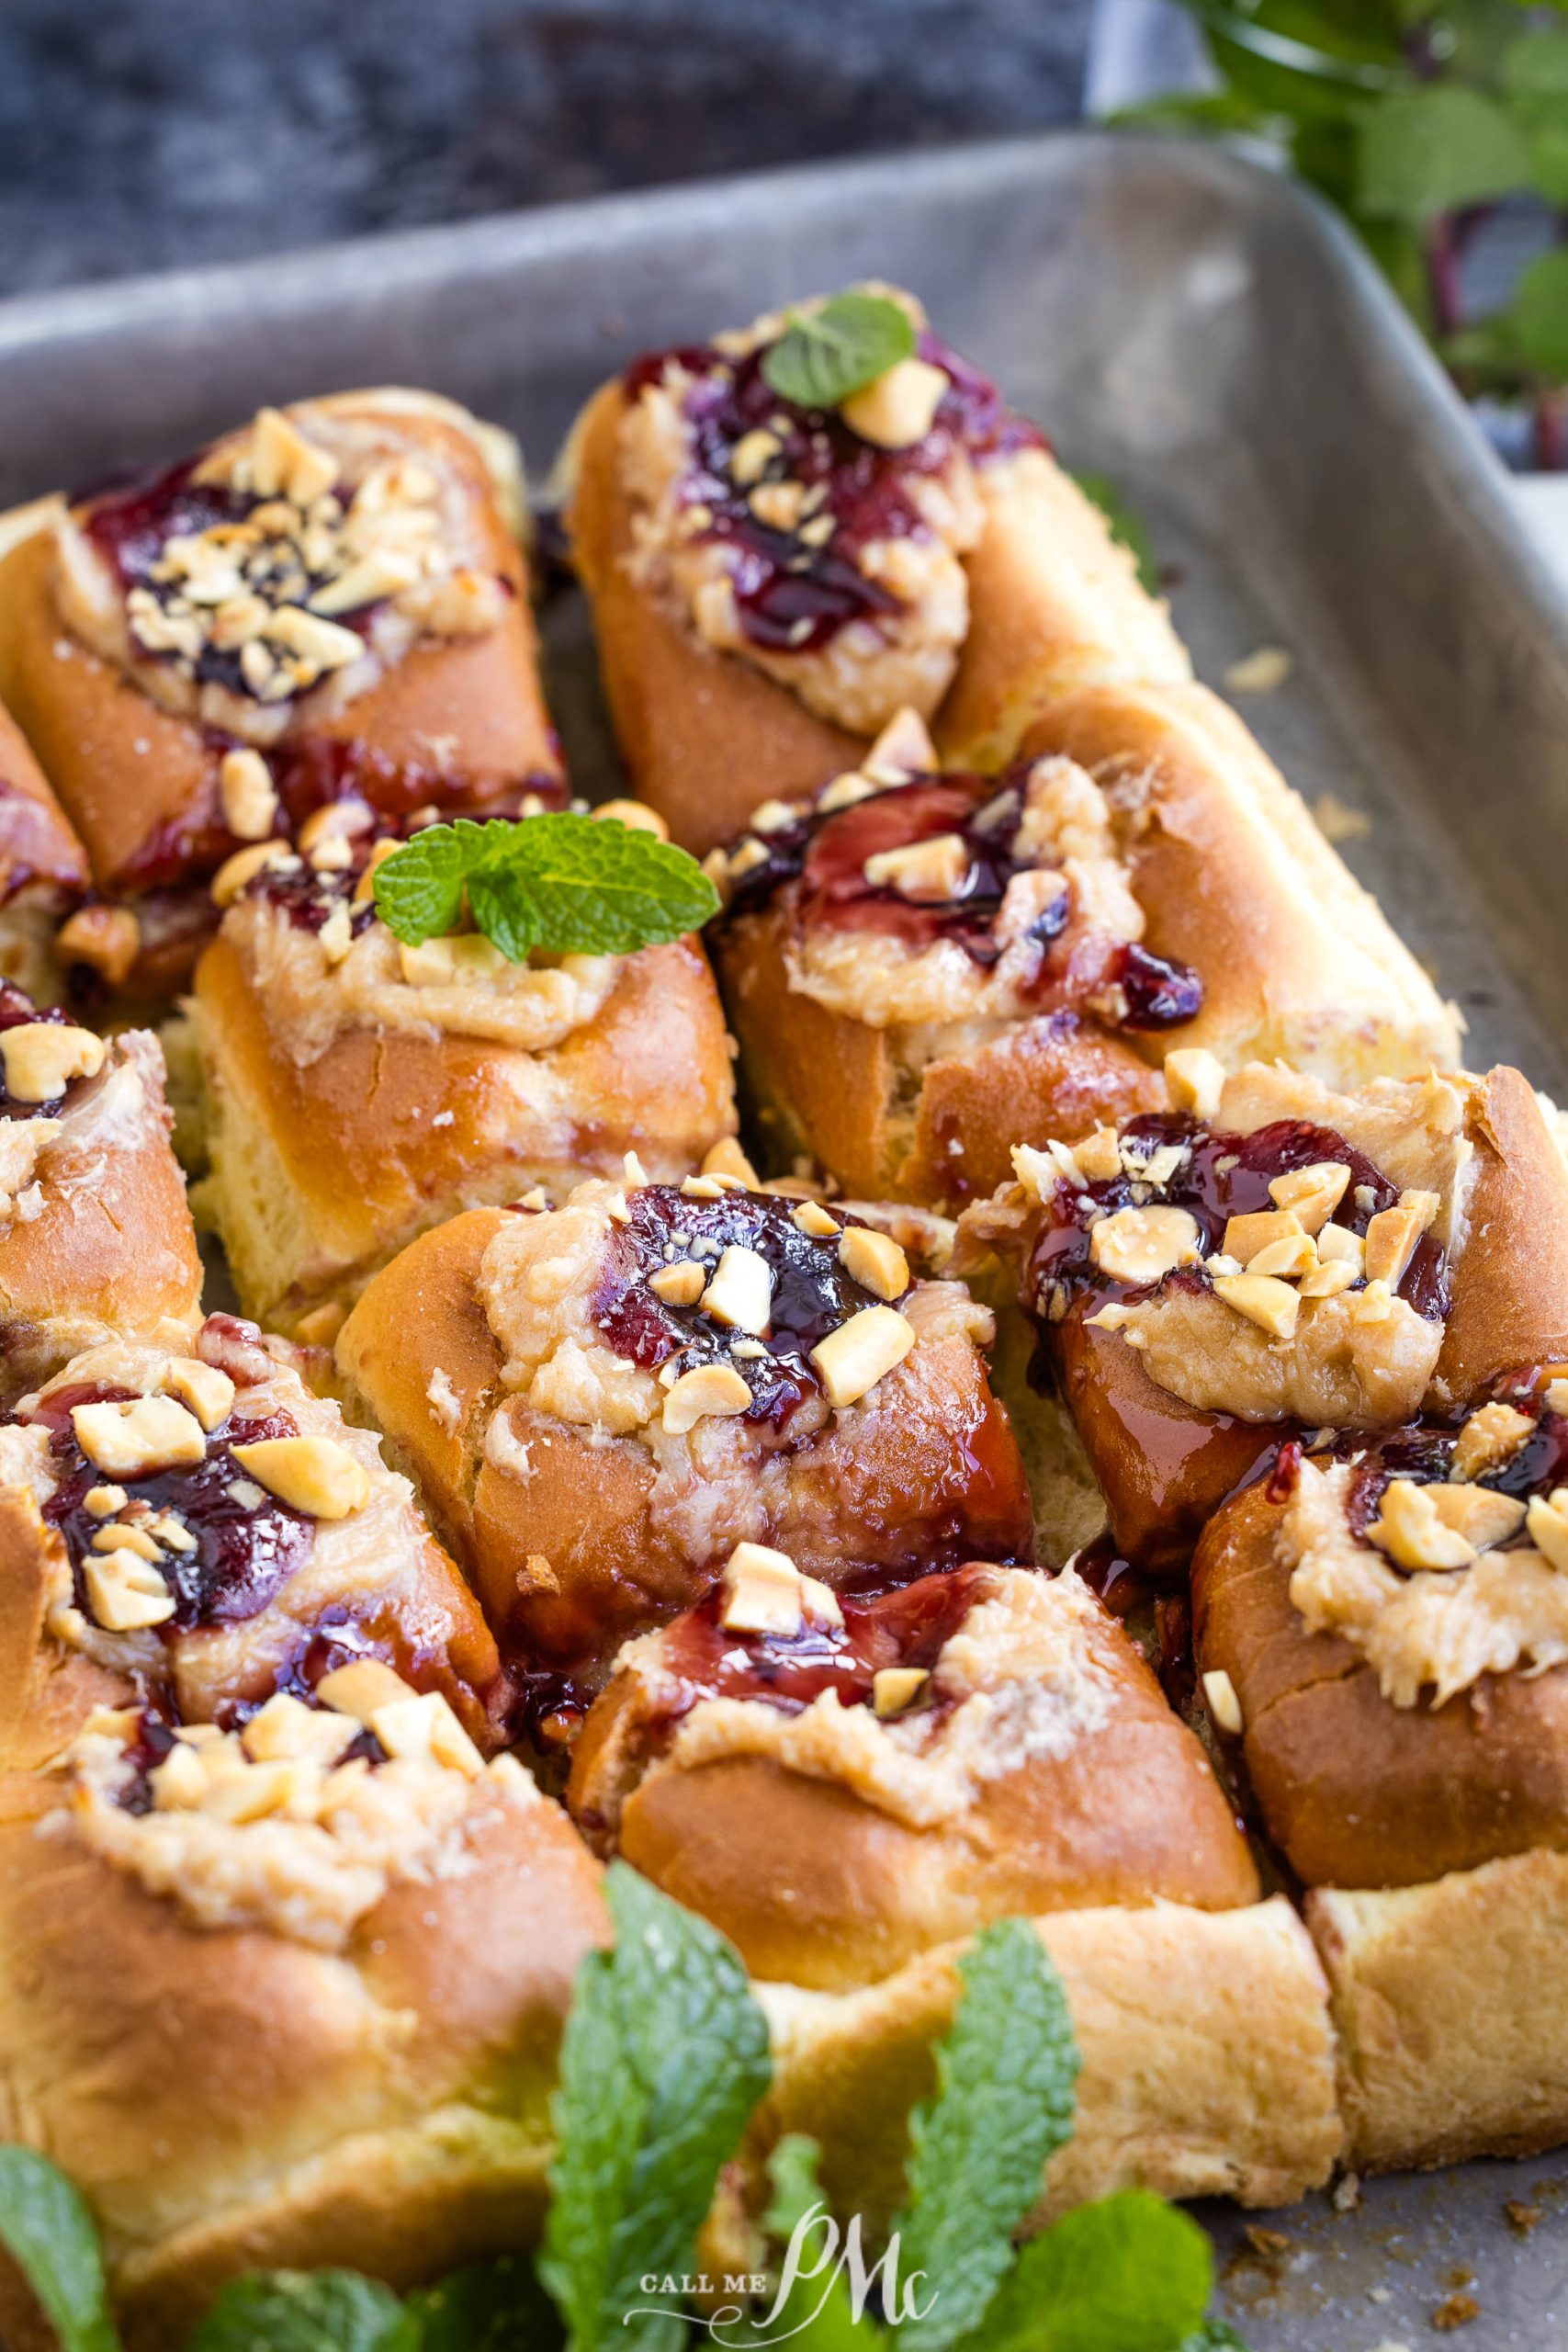 A tray of freshly baked sweet rolls topped with nuts and a fruit glaze, garnished with mint leaves.